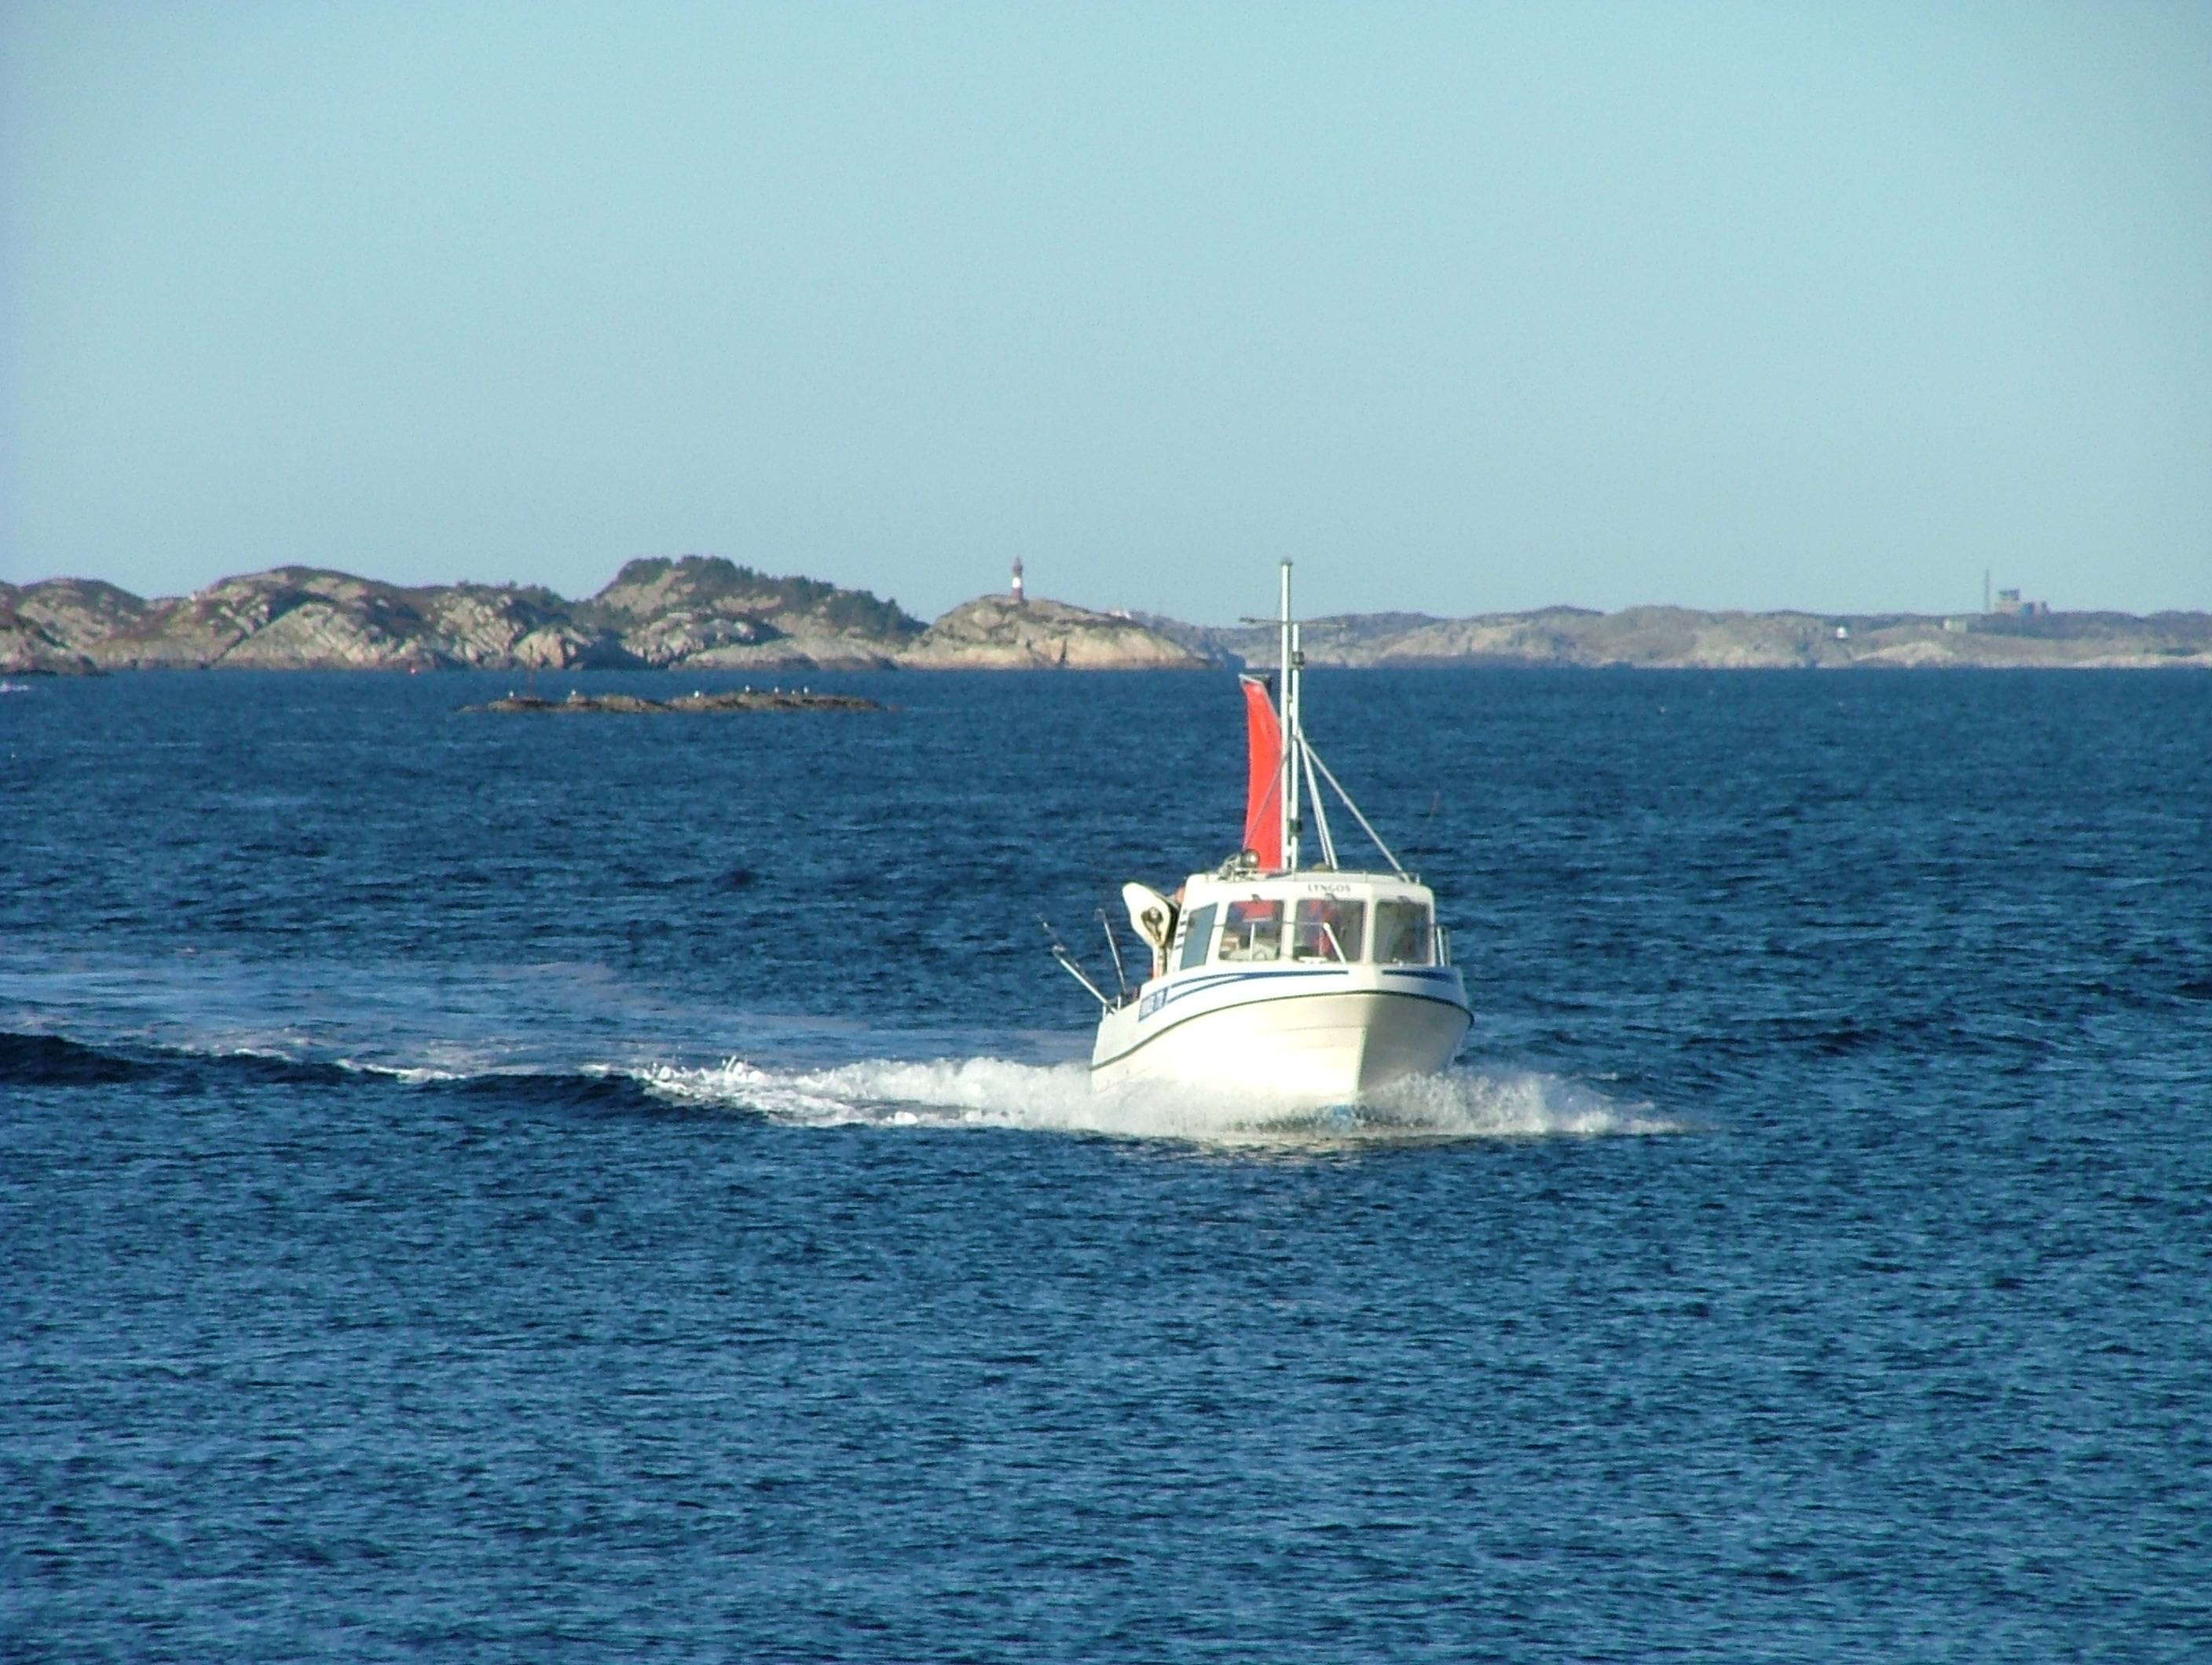 A Fishingboat is on its way to Hellesy